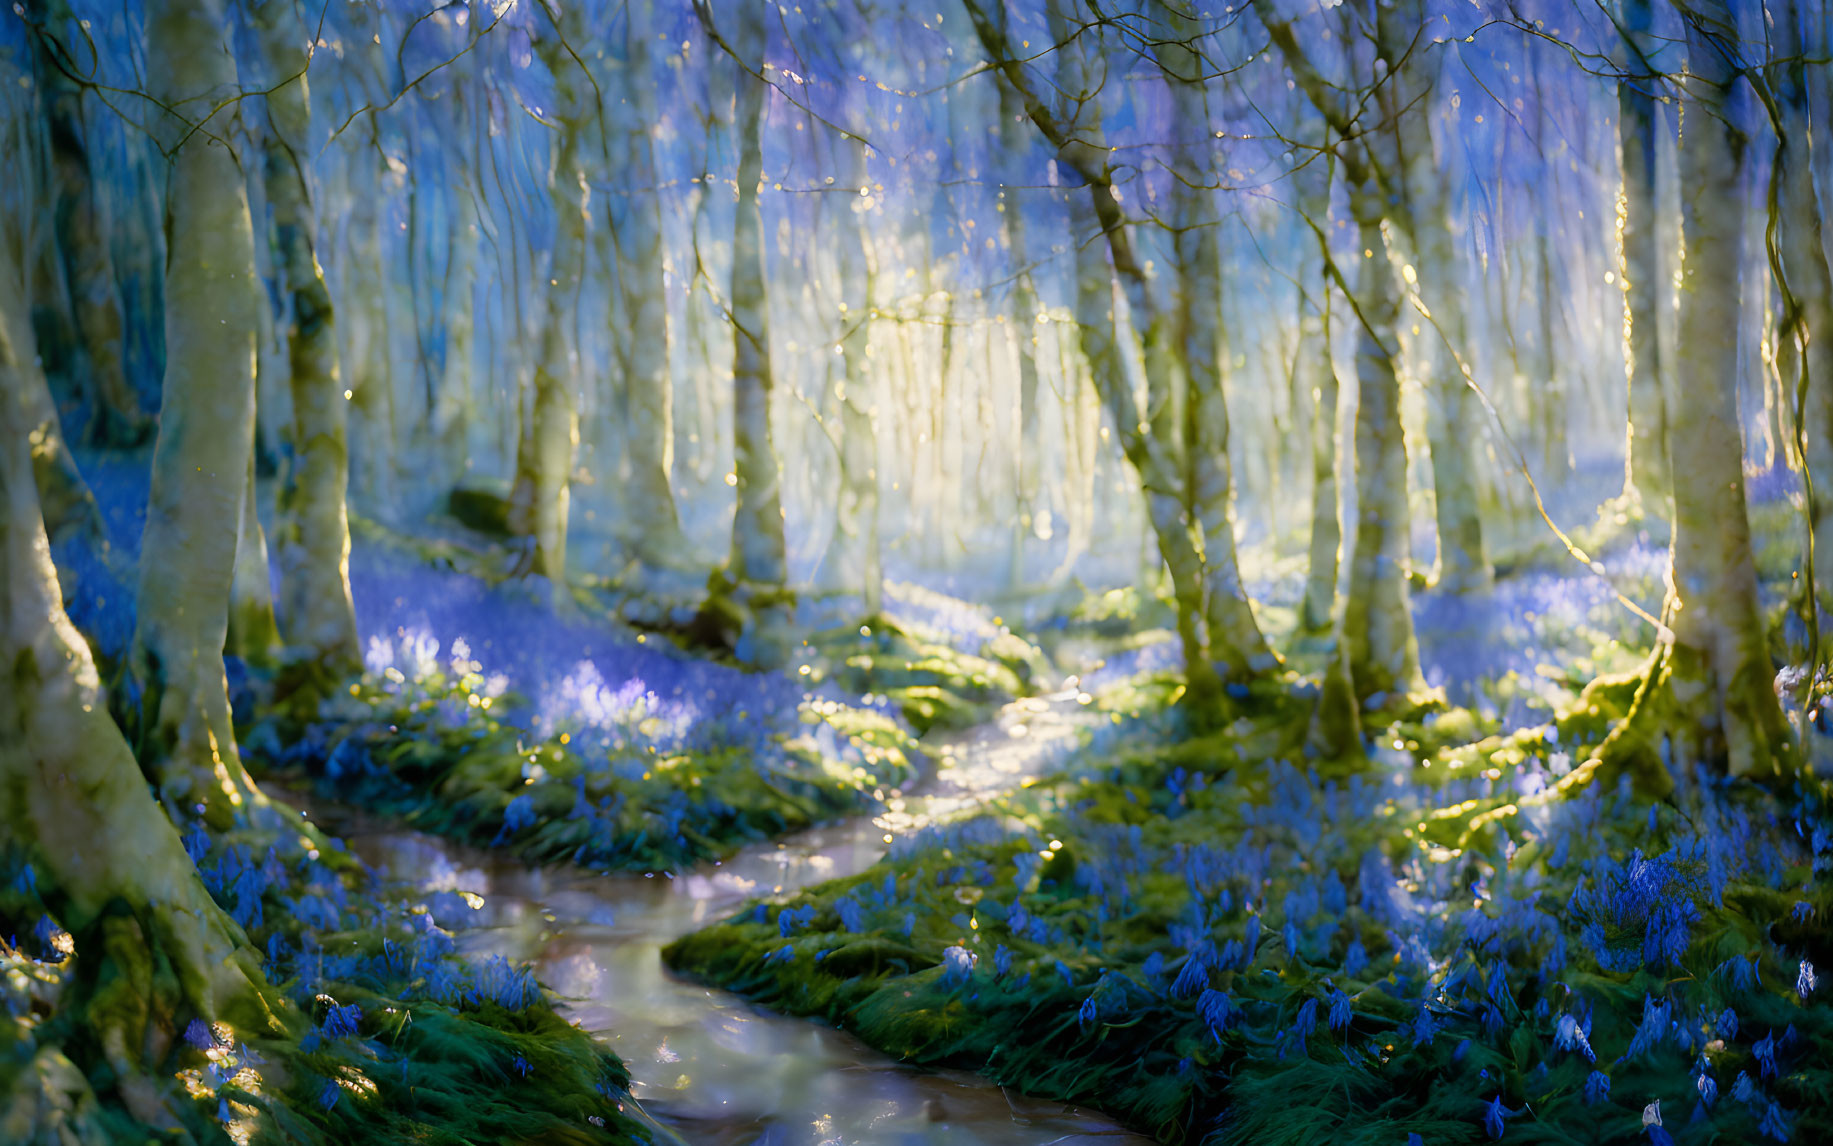 Sunlit Bluebell Forest with White-Barked Trees